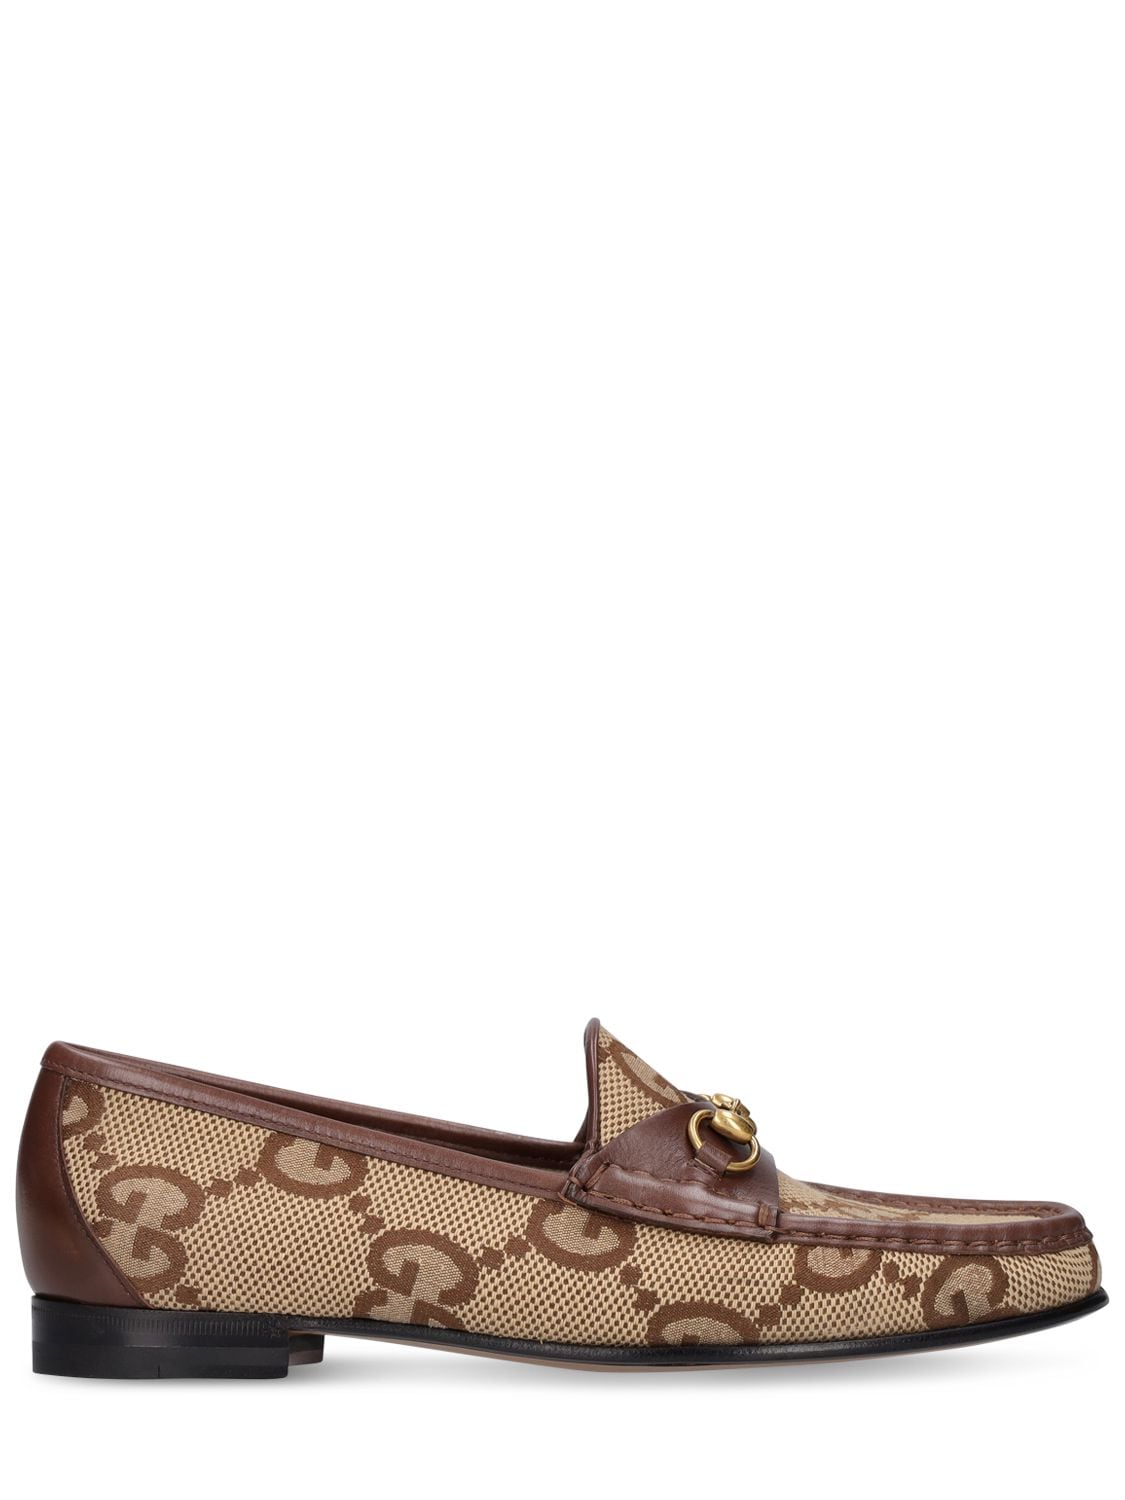 GUCCI 20mm Frame Leather Loafers